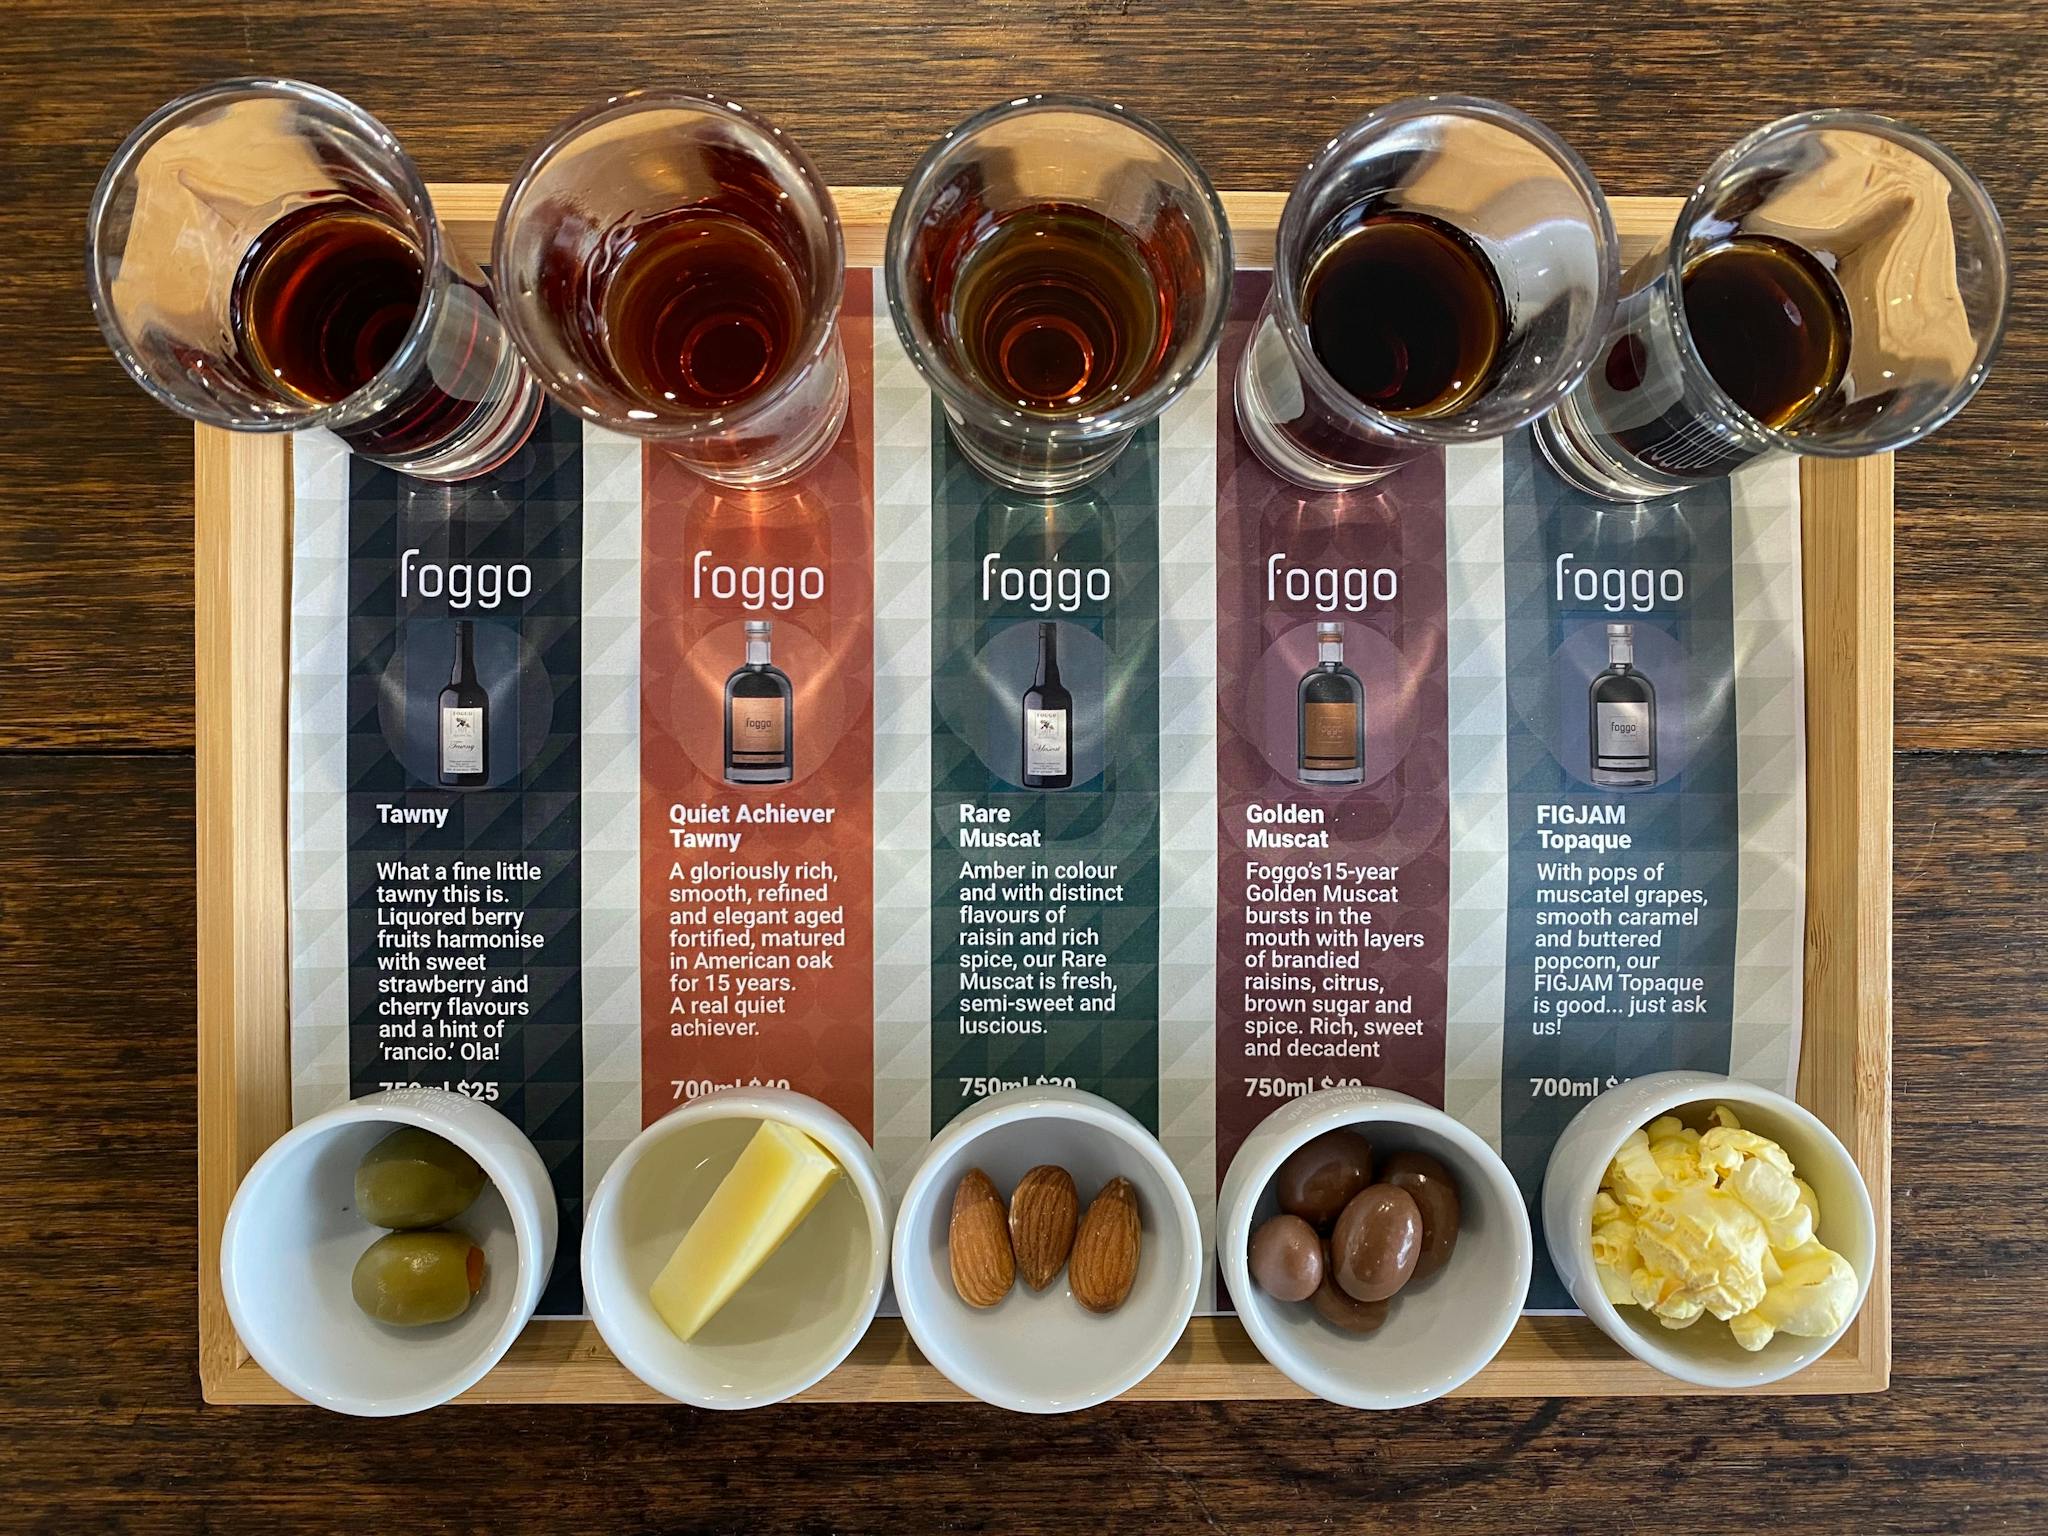 The Heritage Fortified Tasting Flight